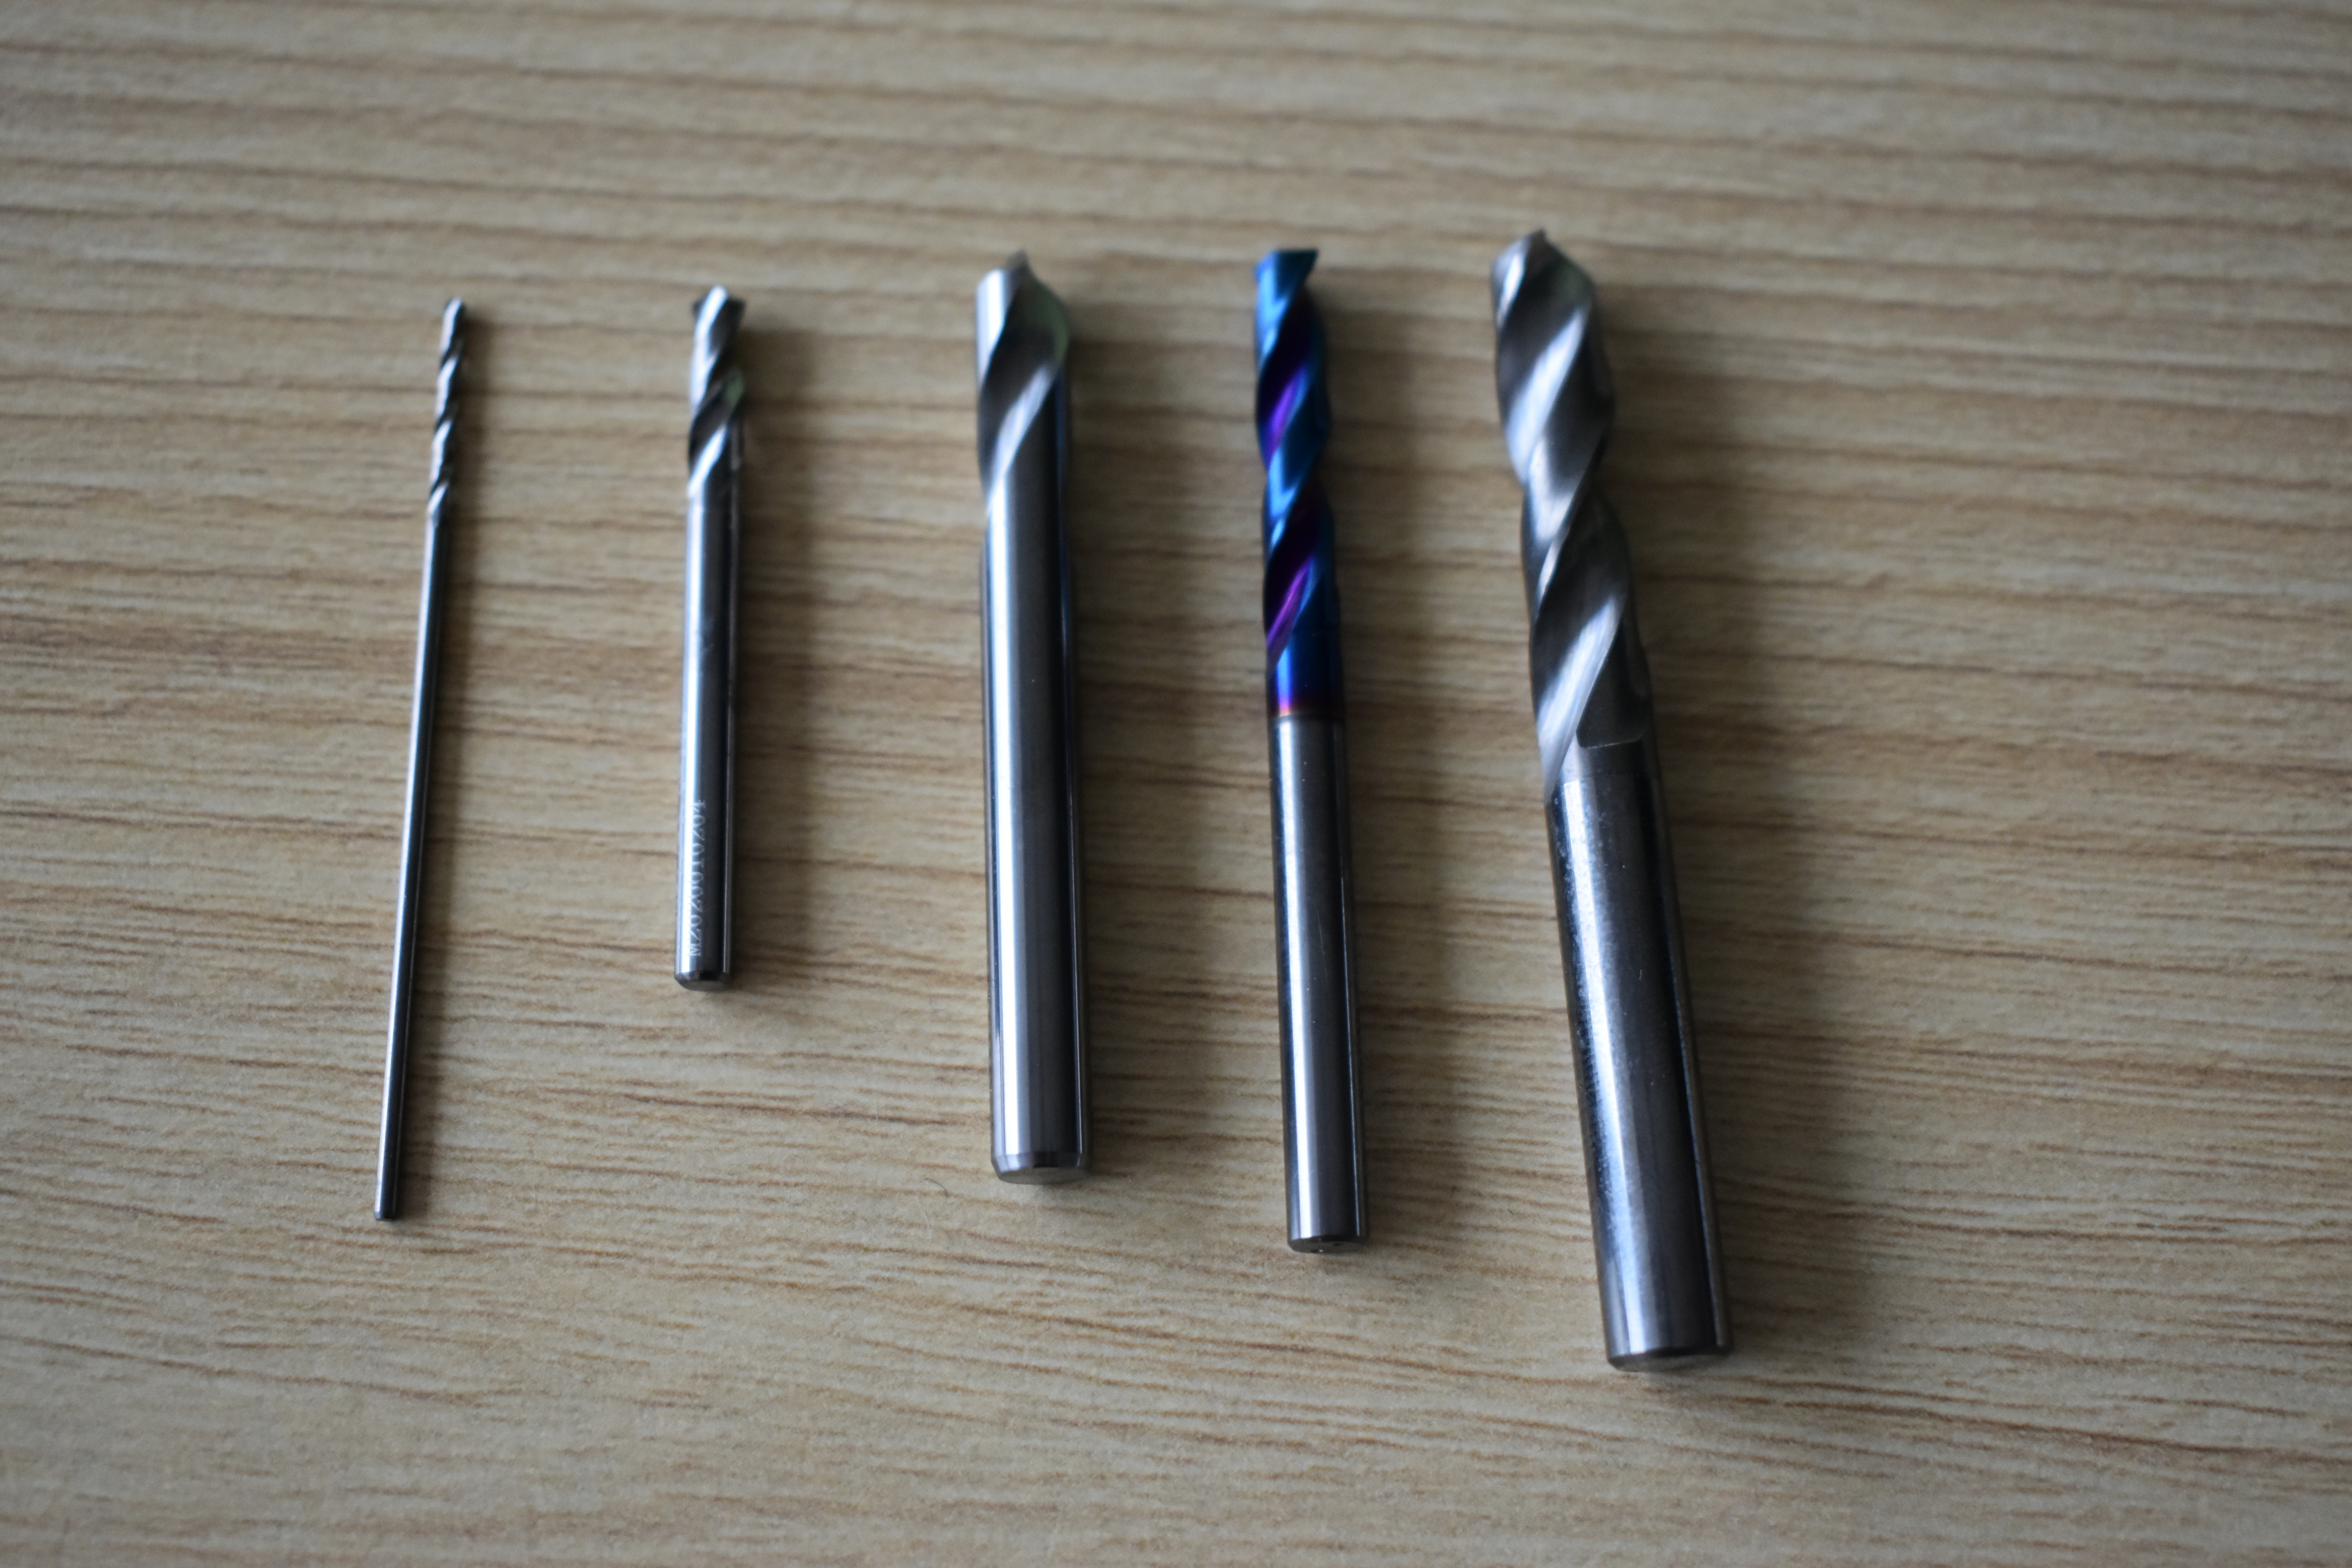 How to Choose a Cemented Carbide Drill?